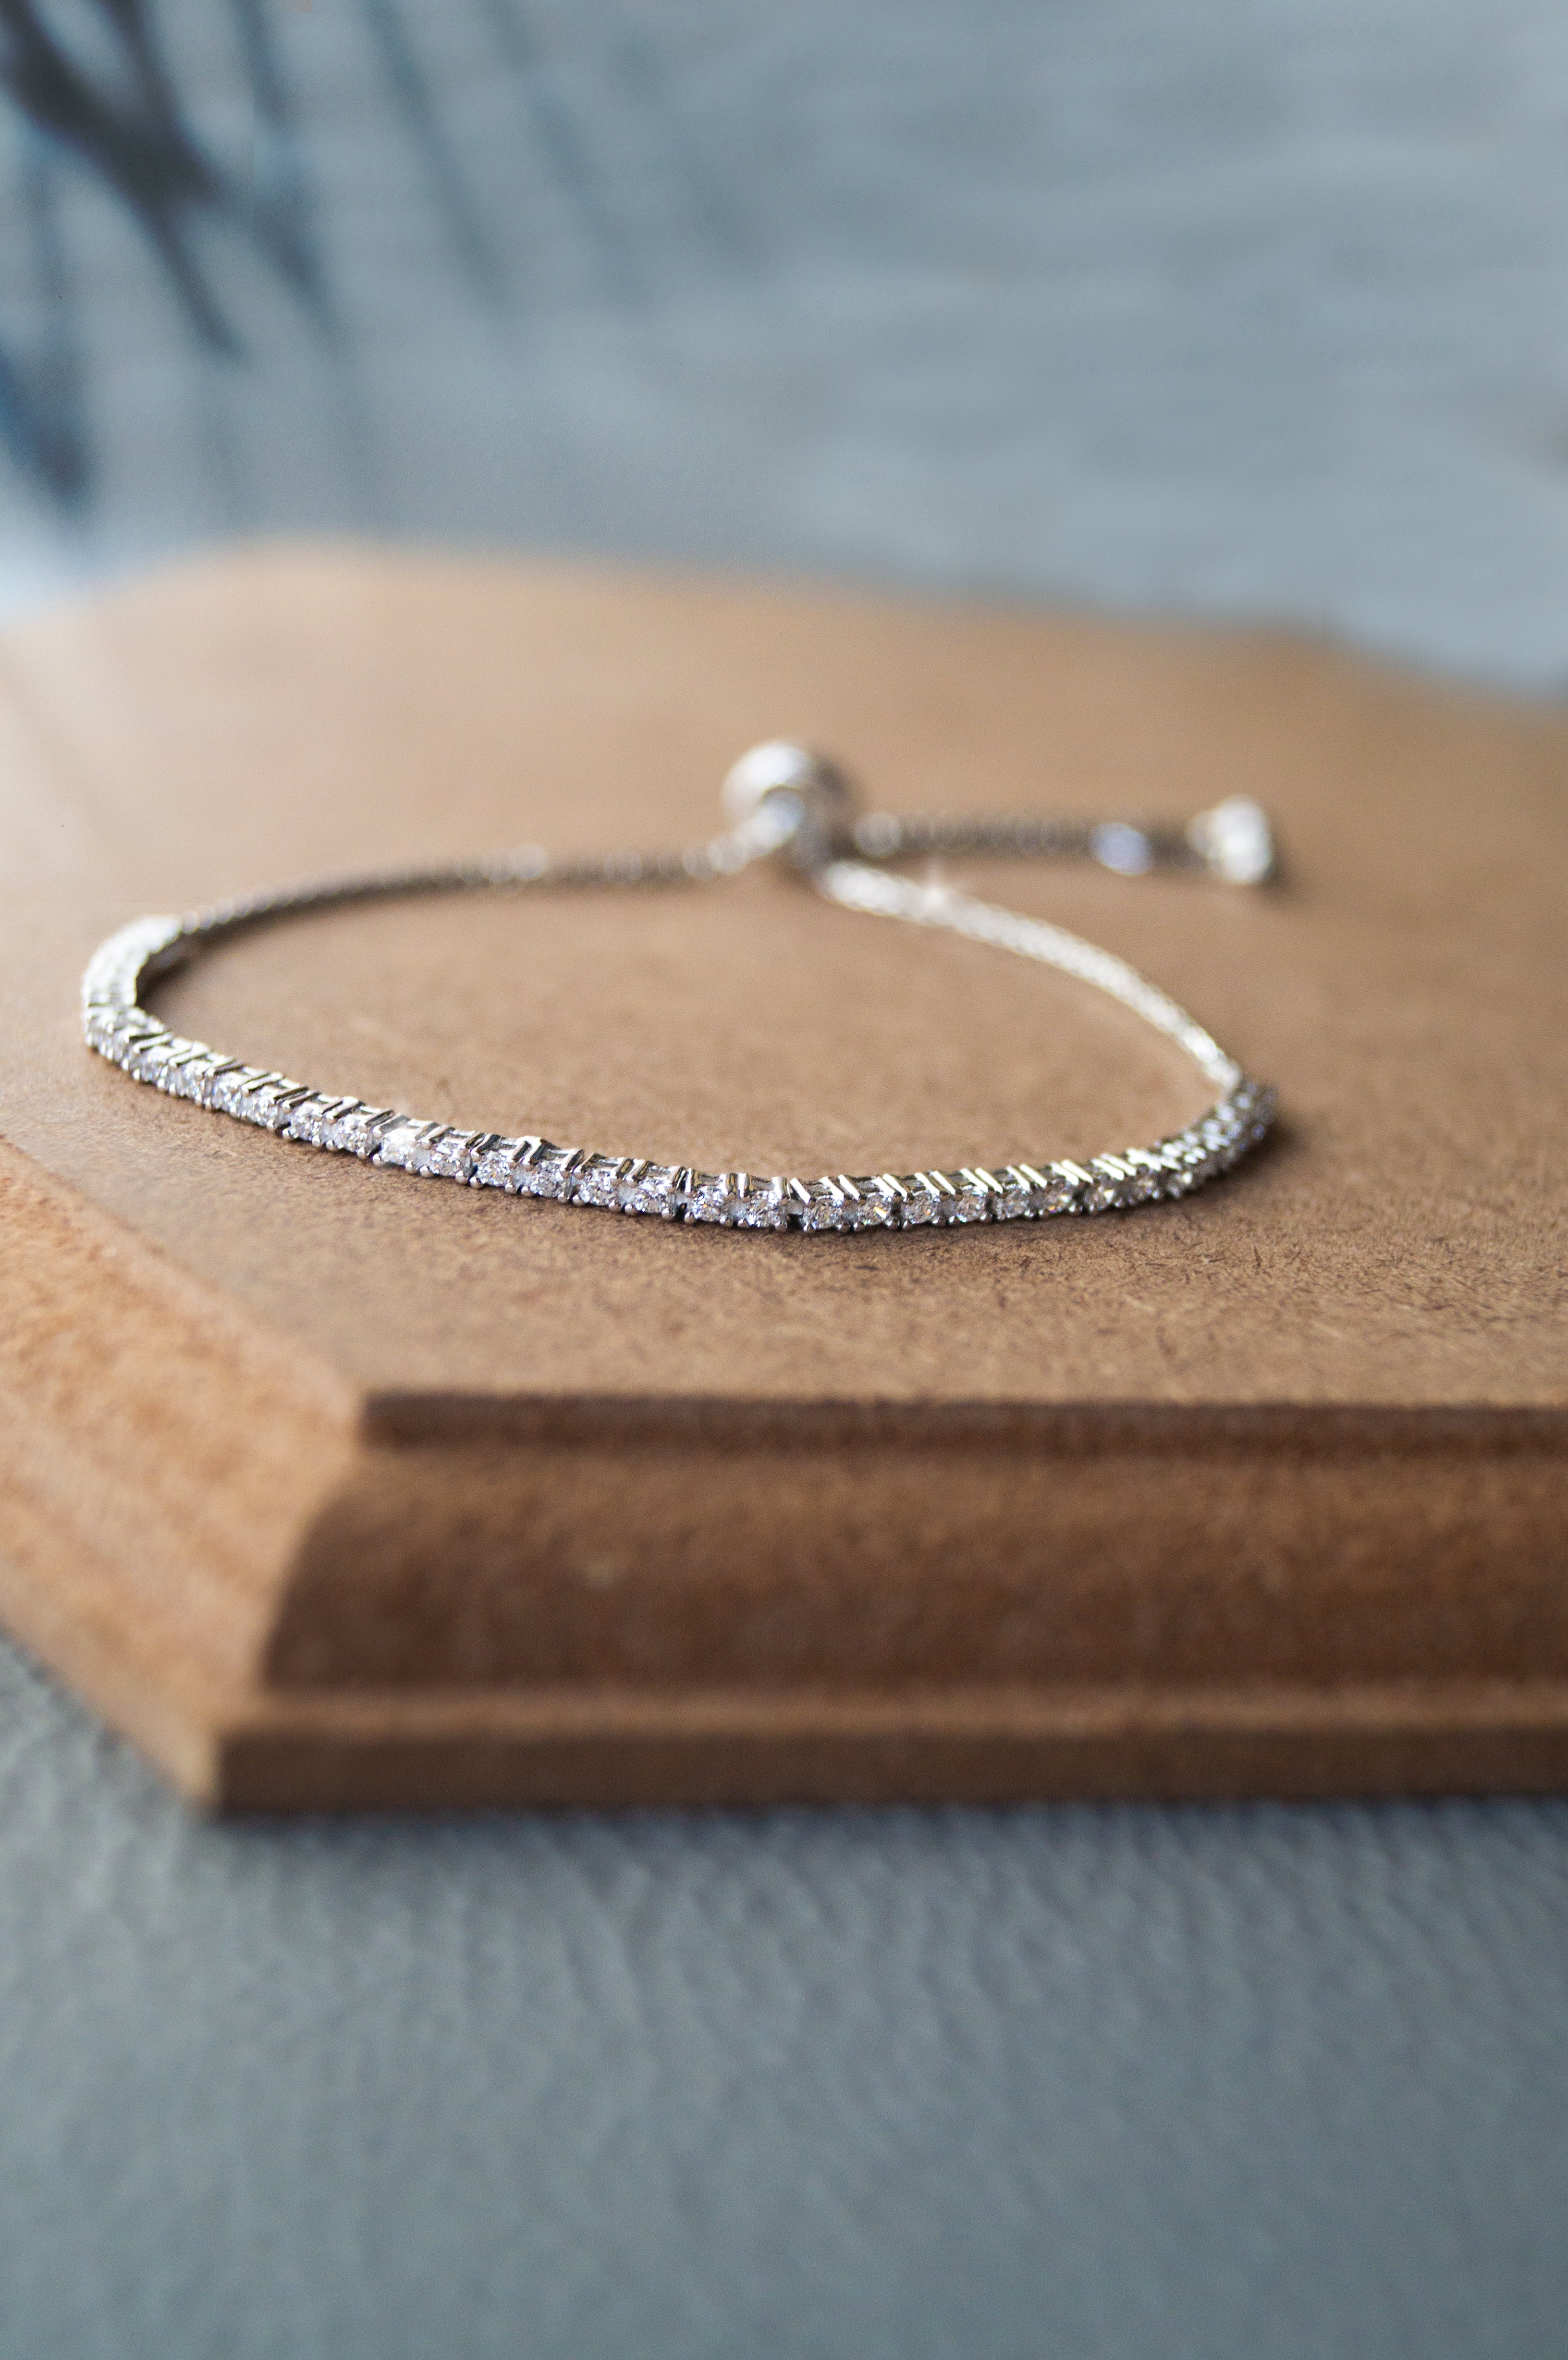 Discover more than 280 sterling silver tennis bracelet